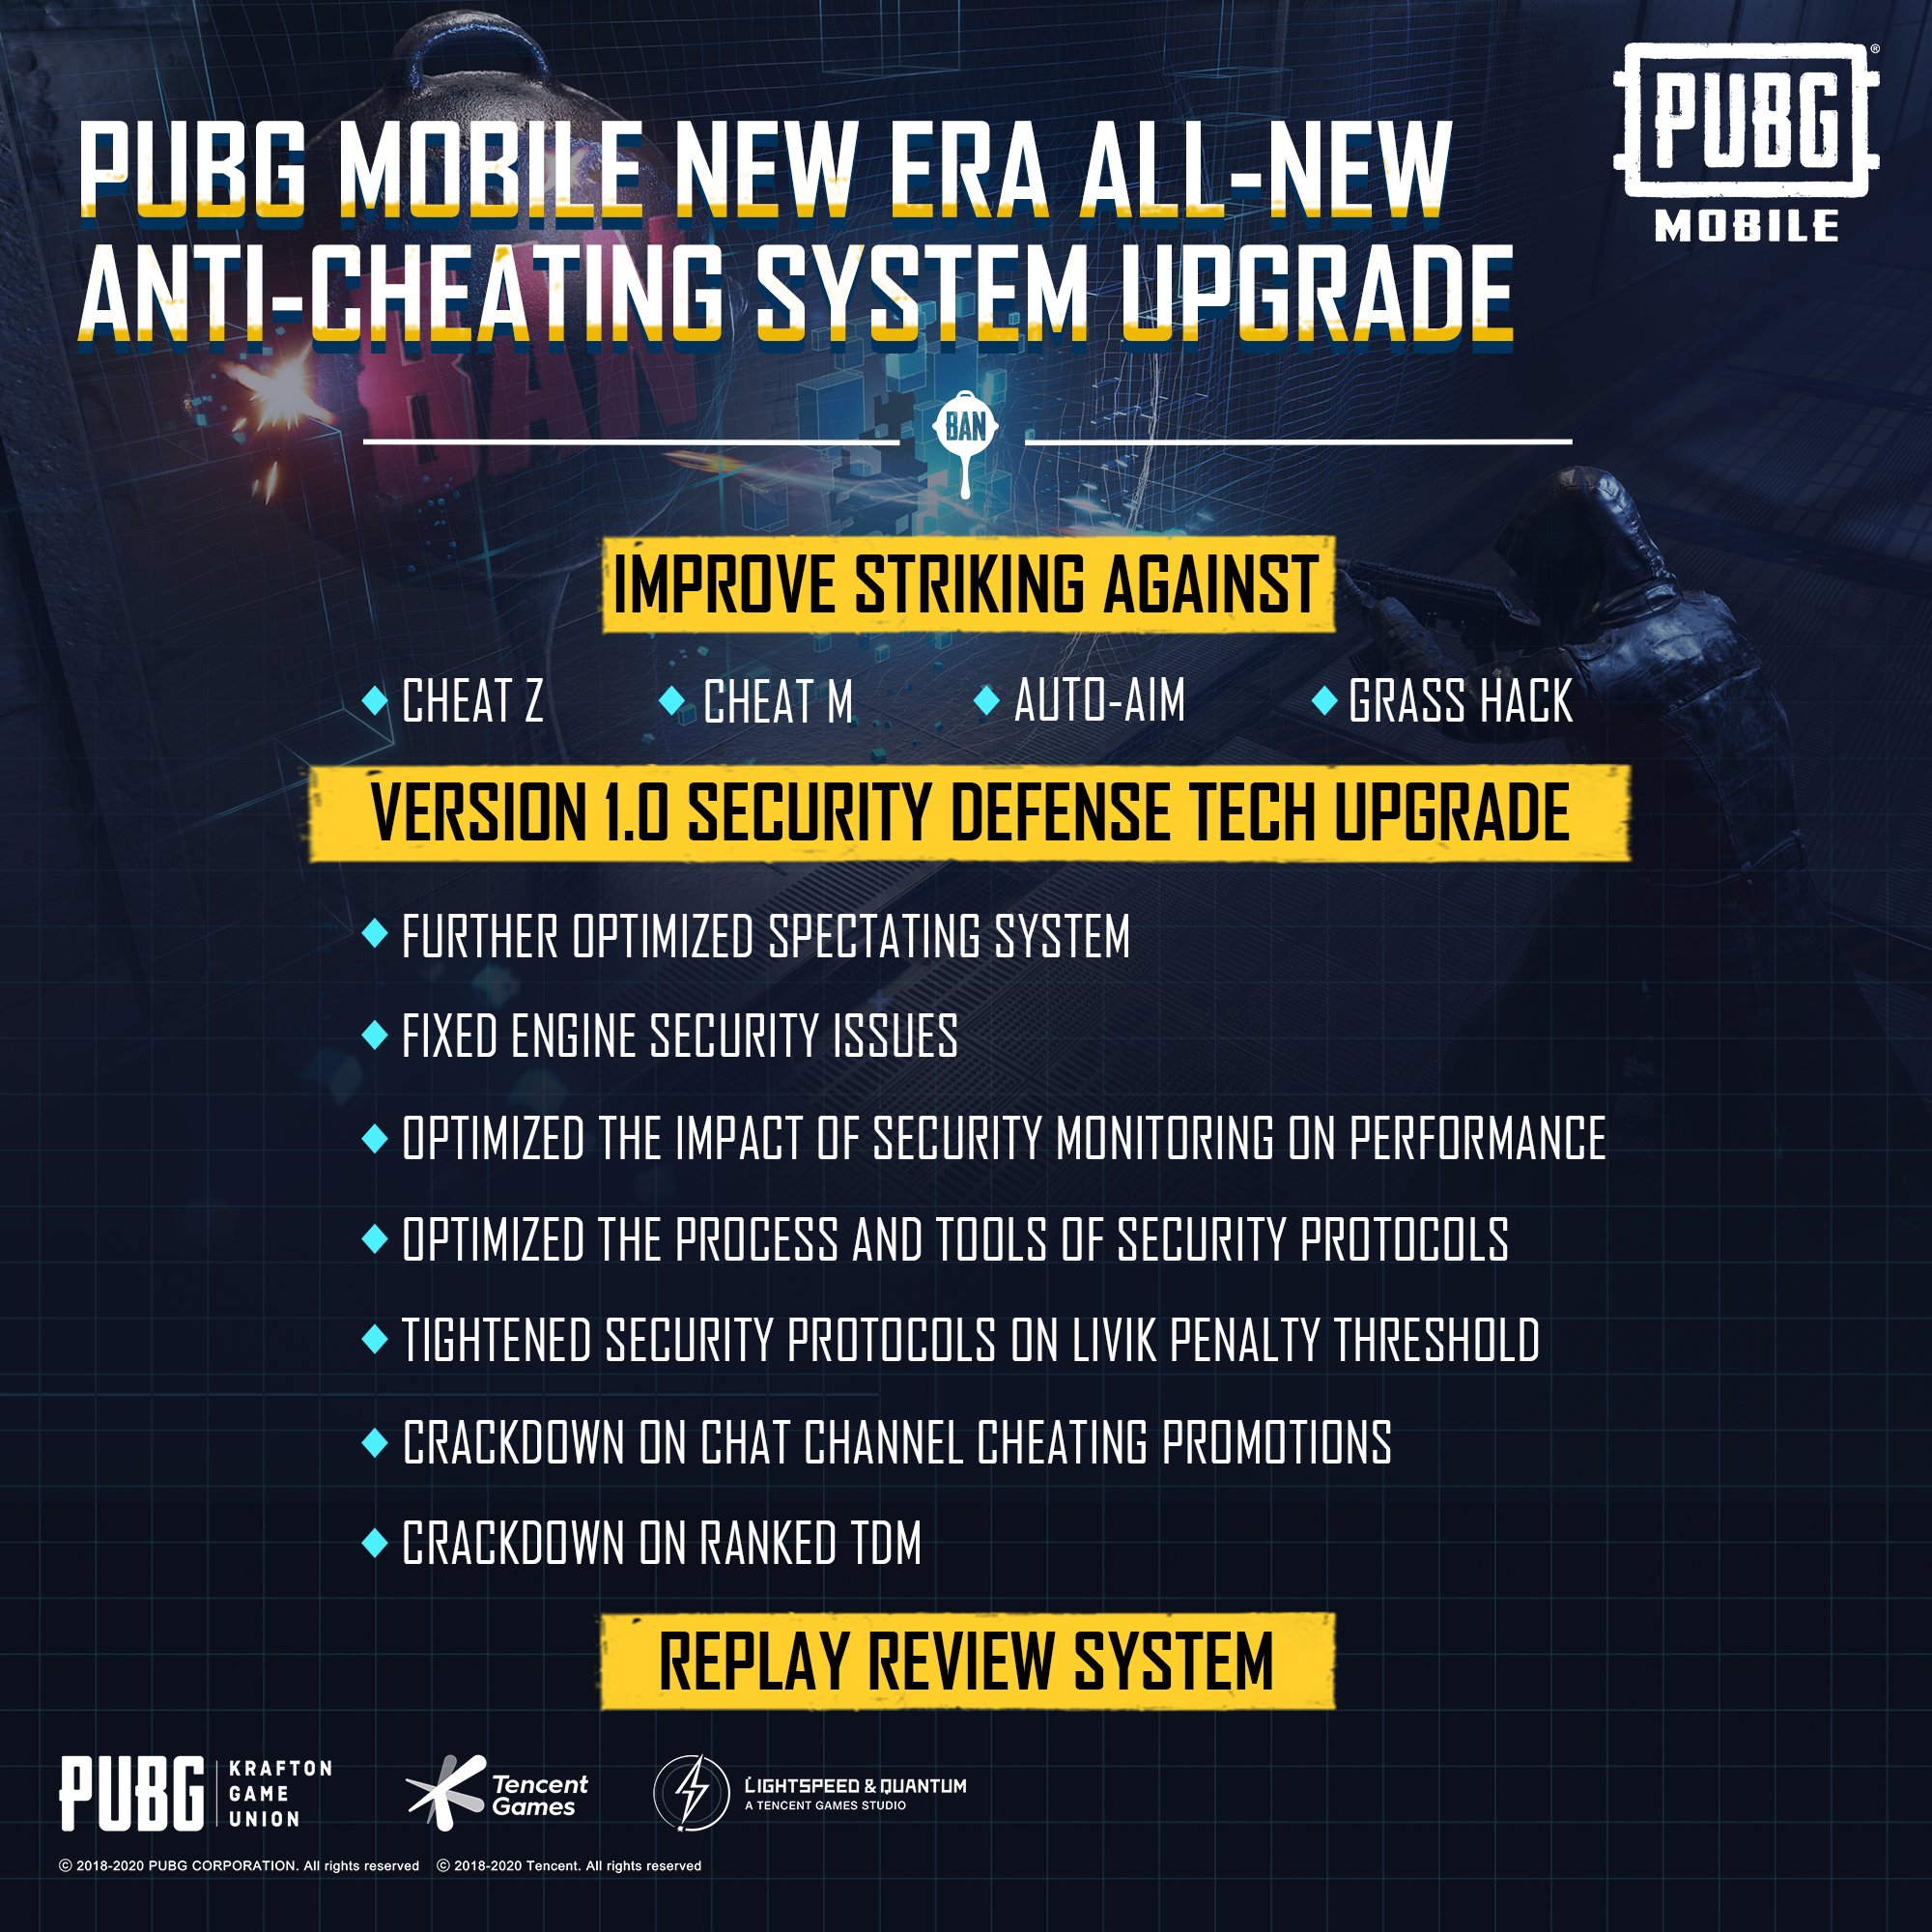 Pubg Mobile Pubg Mobile New Era Is Coming With The All New Anti Cheat System Upgrade We Will Make Sure All The Cheaters Get The Ban Pan They Deserve T Co 3lbsqcrztp